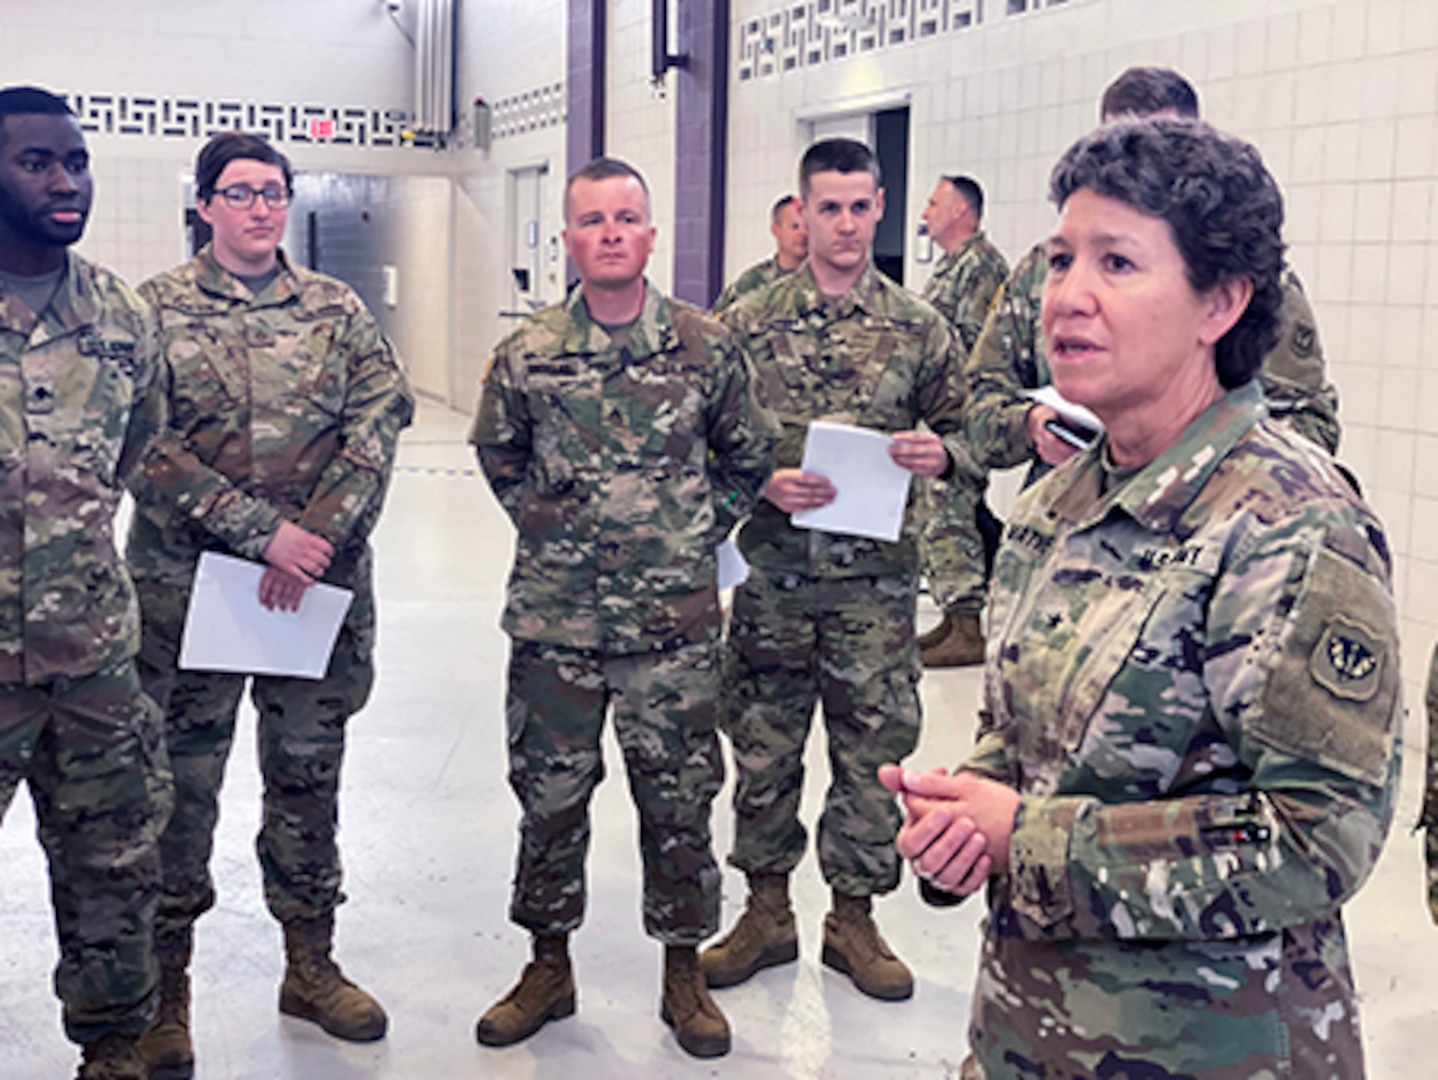 Brig. Gen. Joane Mathews, Wisconsin’s deputy adjutant general for Army, speaks March 12, 2020, to troops mobilizing for state active duty in response to the Wisconsin Department of Health Service’s request for assistance at the outset of the COVID-19 pandemic. Mathews is retiring after a career of firsts.